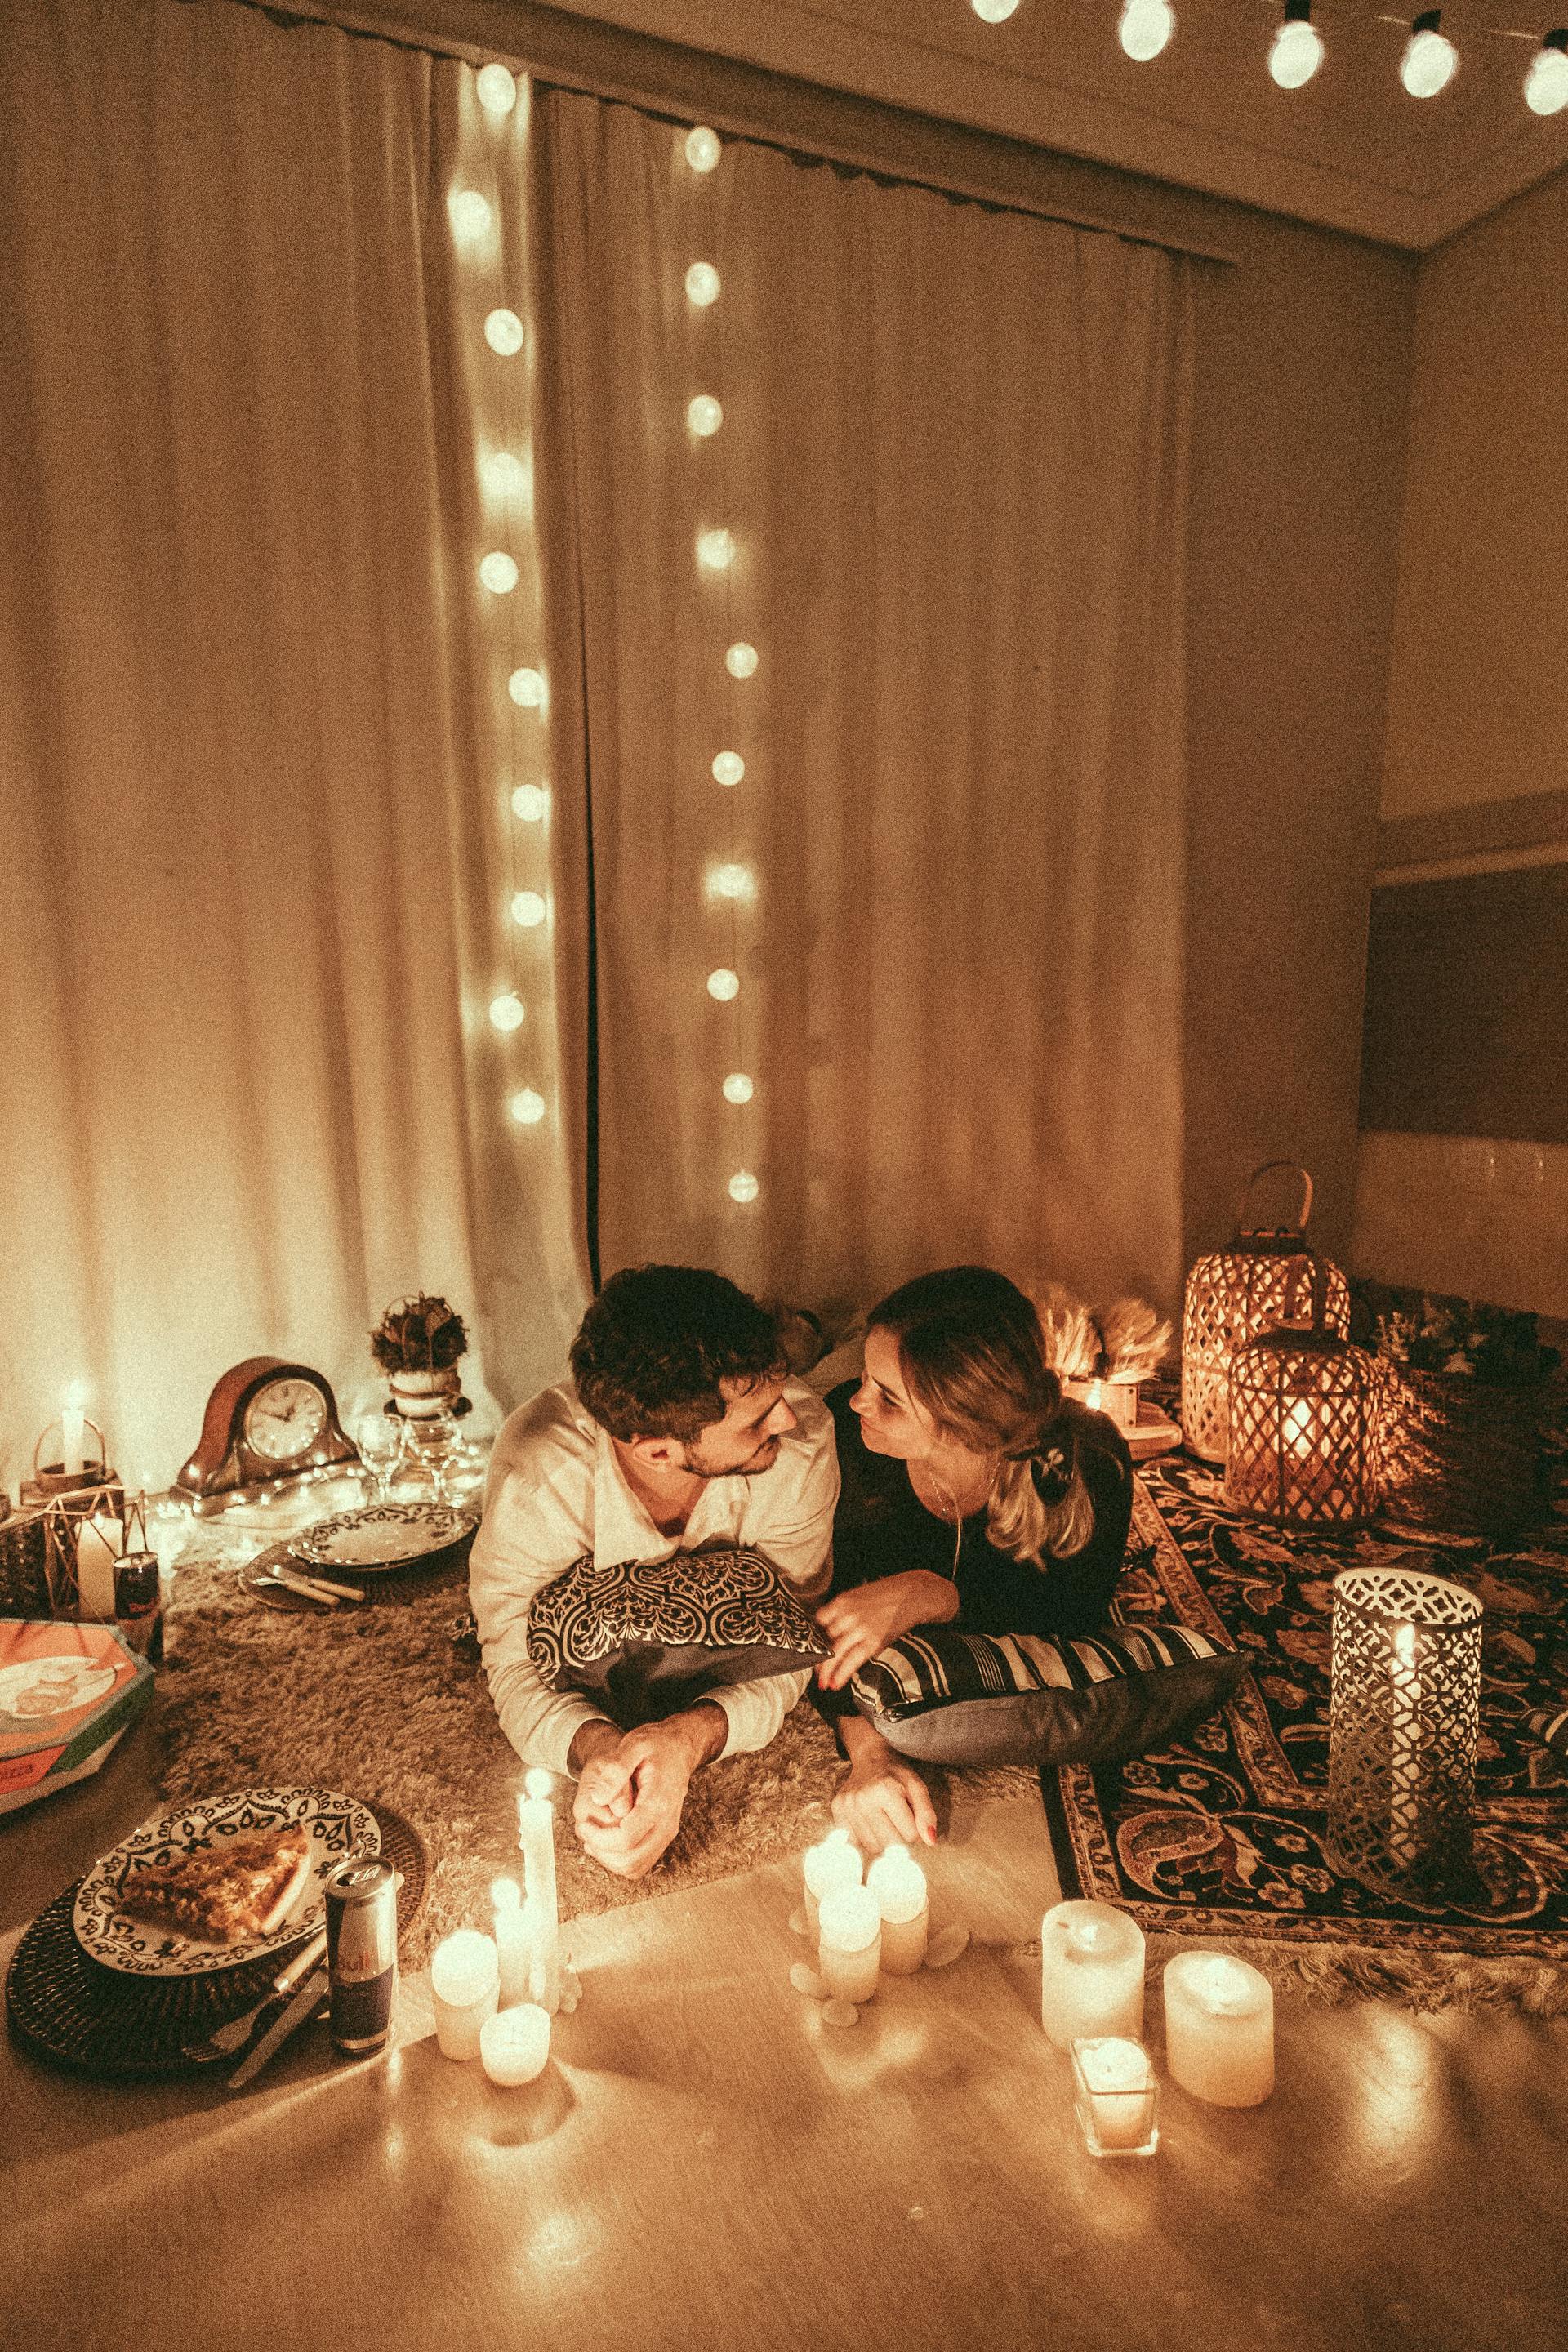 A couple during candlelight dinner | Source: Pexels